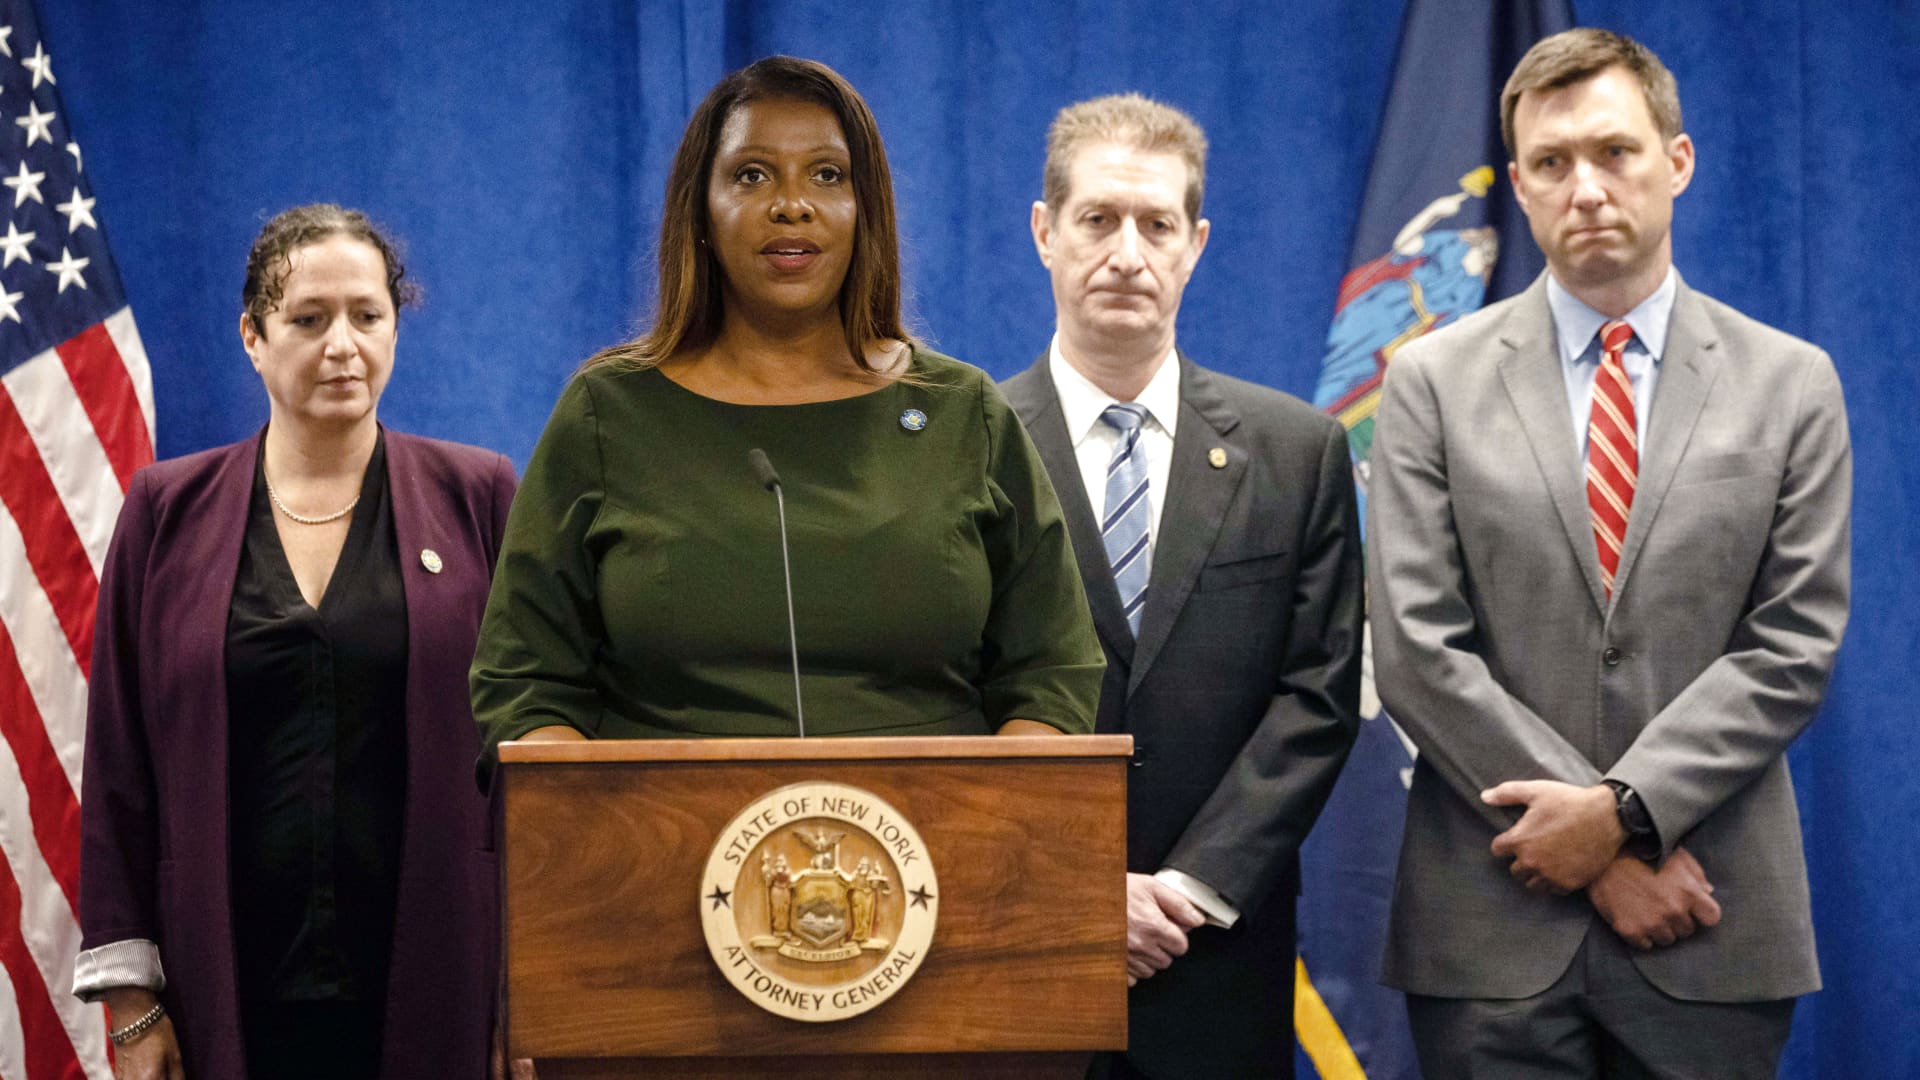 New York Attorney General Letitia James says Trump committed crimes, asks federal prosecutors and IRS to investigate